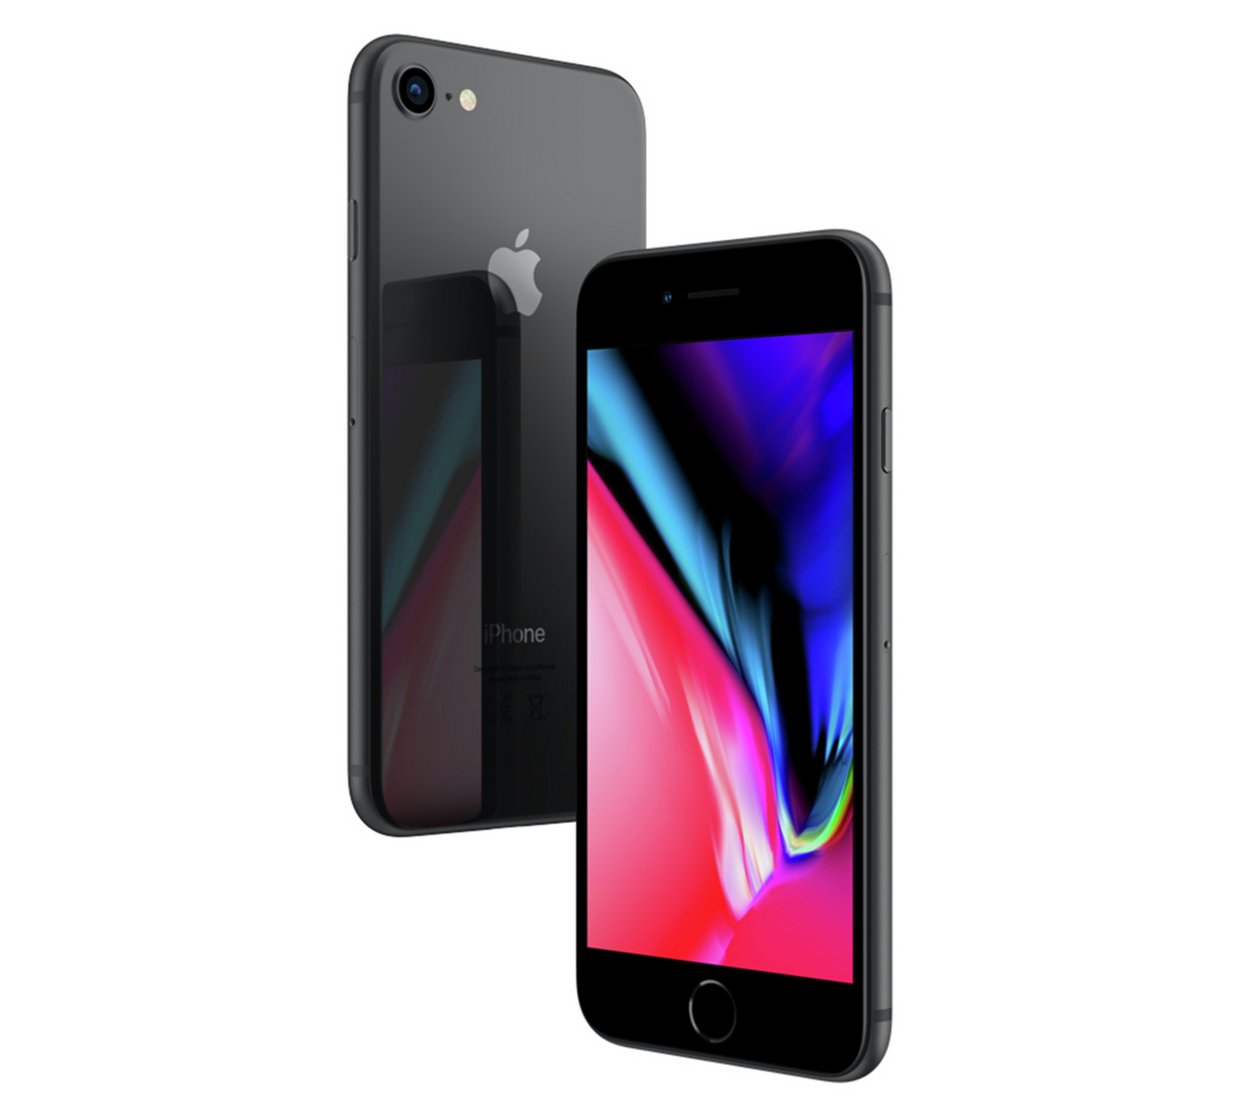 iPhone 8 - 64GB - Space Grey - Grade A - The iOutlet